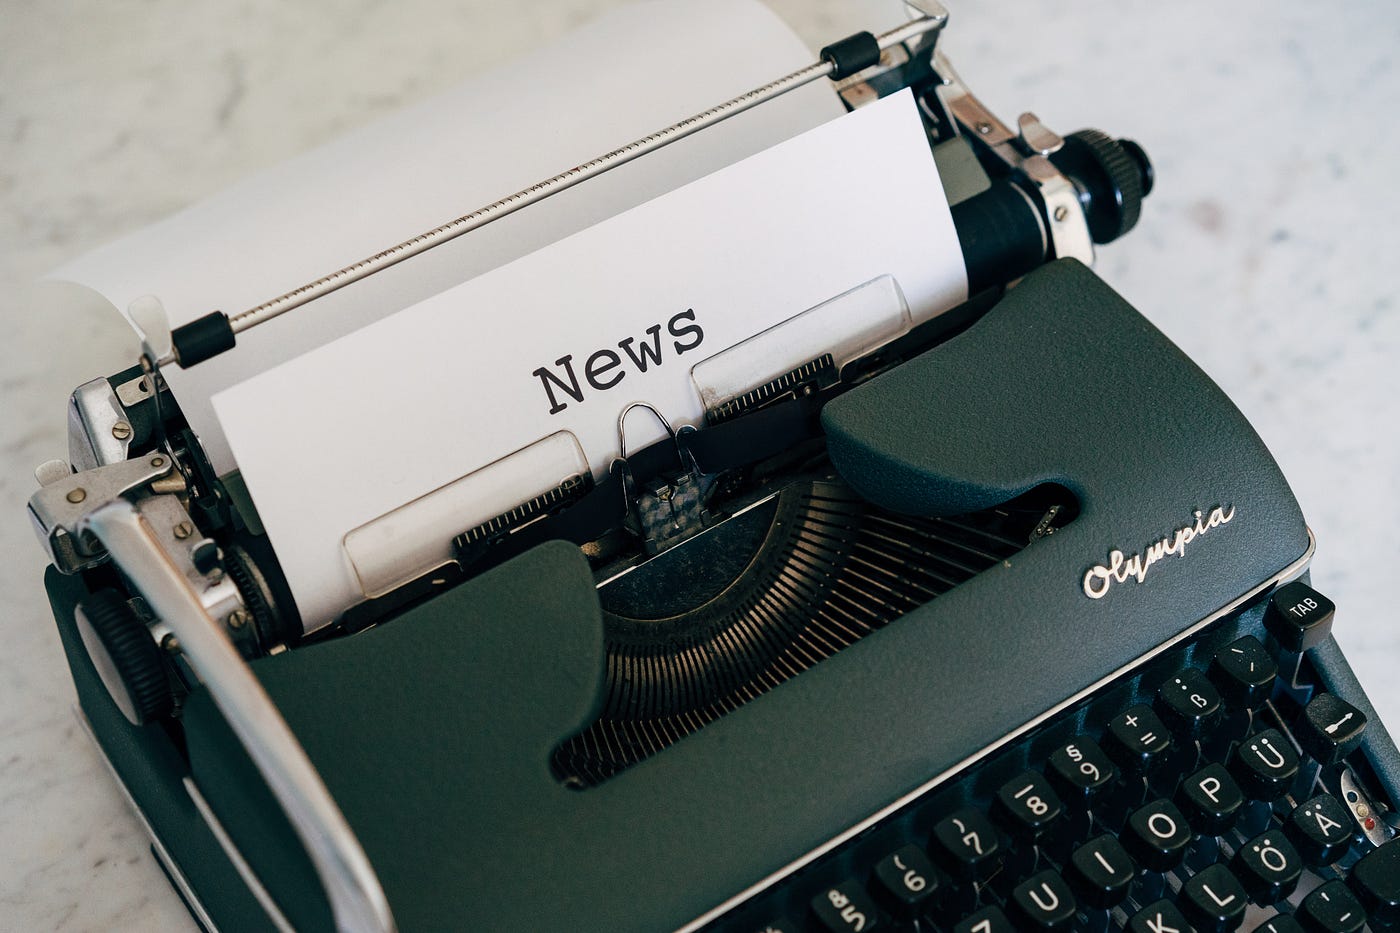 Typewriter with a document in the feeder stating “News”